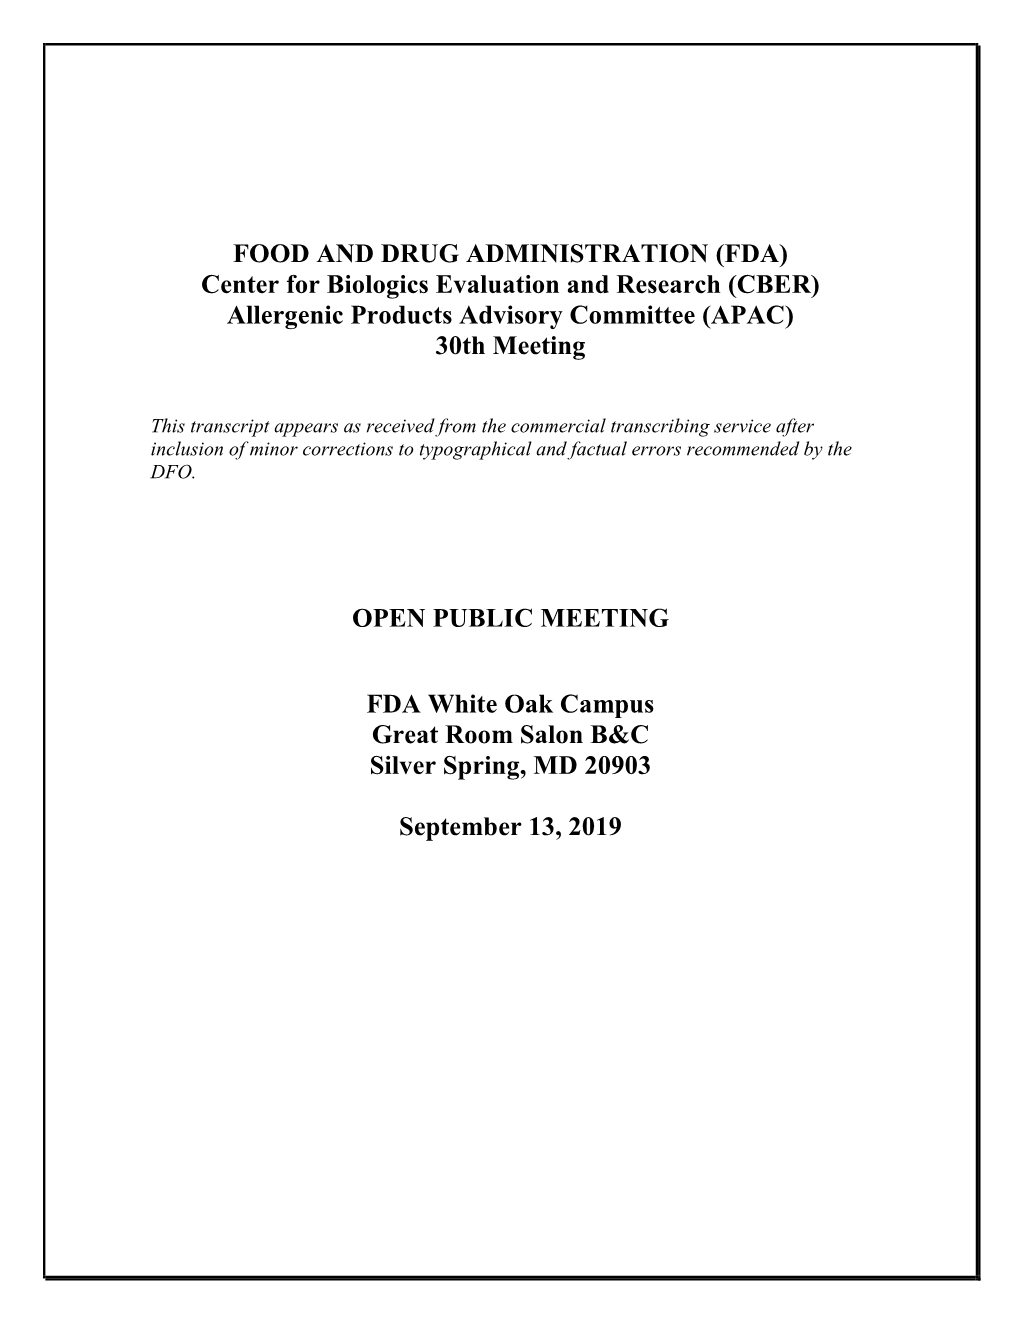 (CBER) Allergenic Products Advisory Committee (APAC) 30Th Meeting